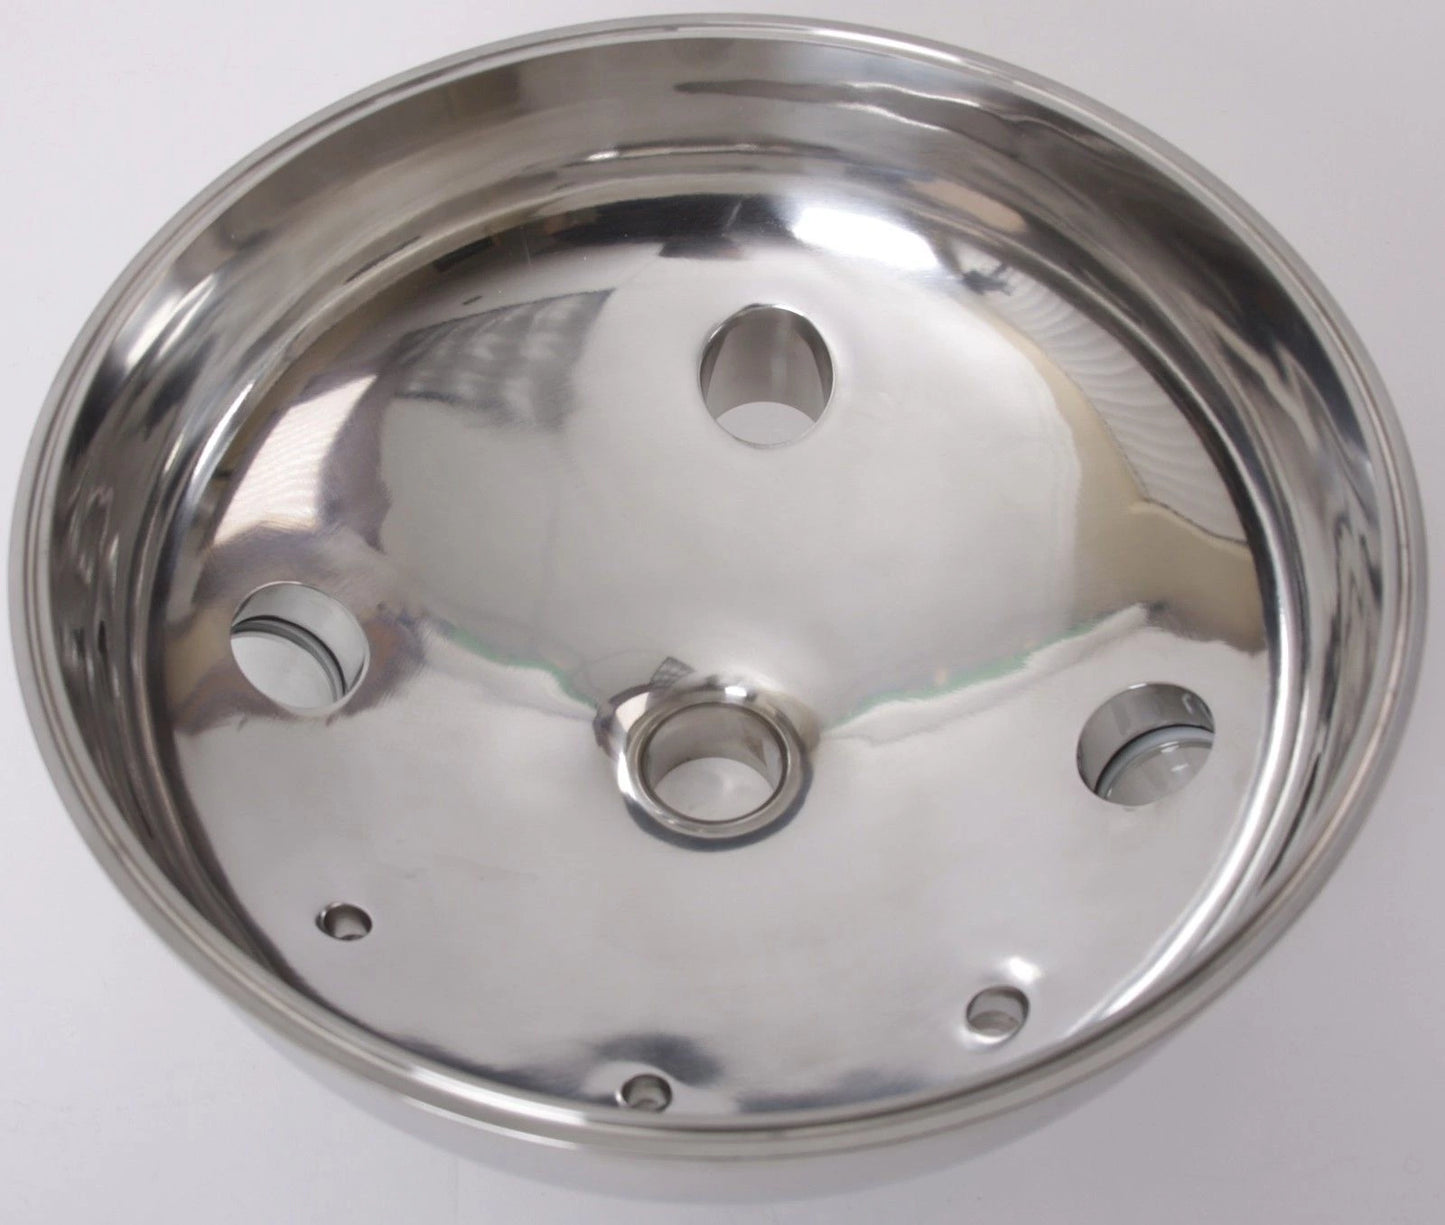 Domed Extraction Tank Lid - Tri Clamp 12" x 1.5" w/ (2) 1.5" SGPVs, (2) FNPT 1/4",  FNPT 3/8"